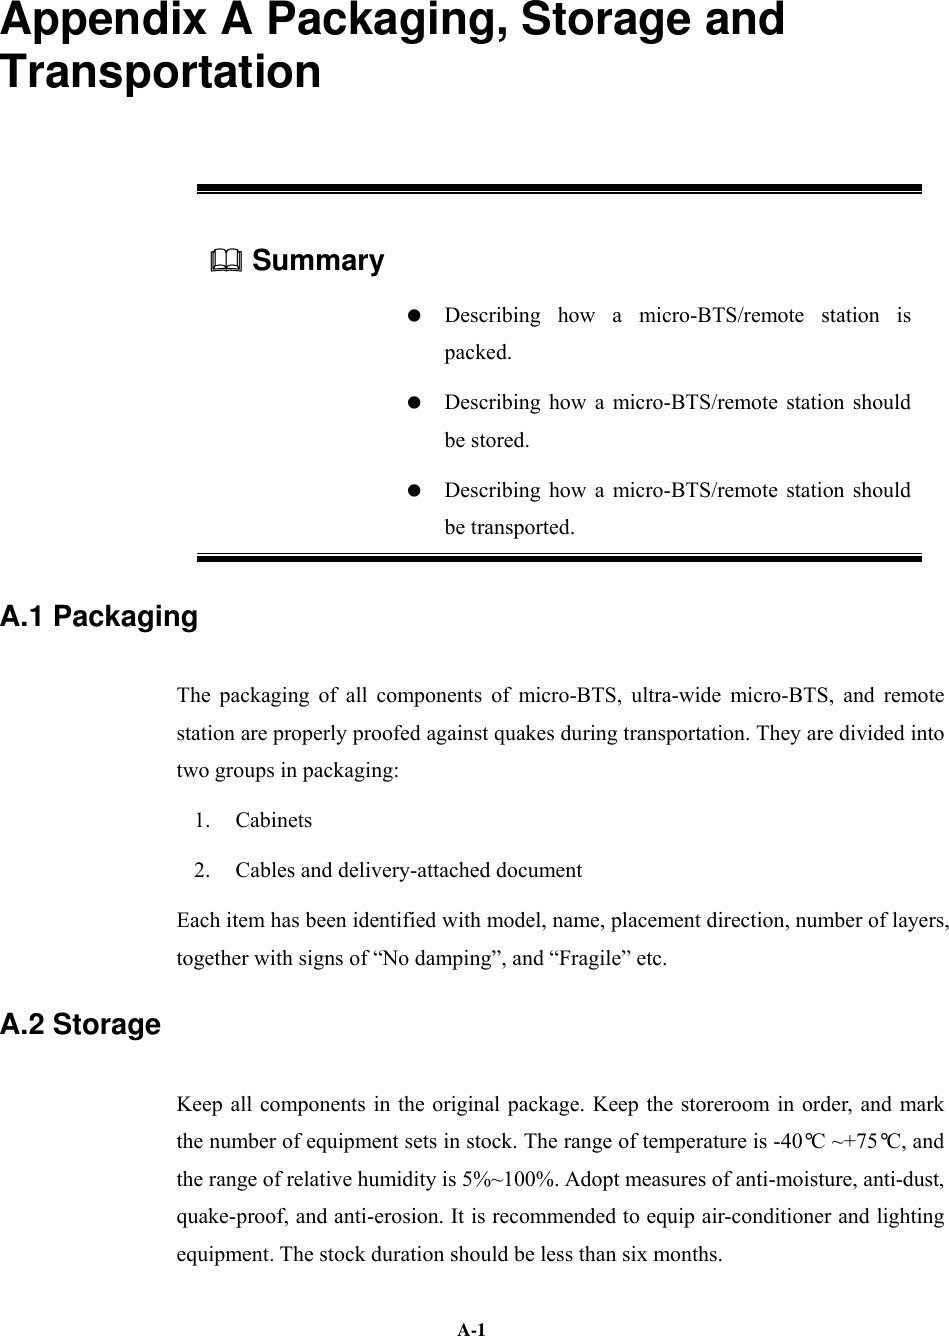   A-1Appendix A Packaging, Storage and Transportation  Summary      Describing how a micro-BTS/remote station is packed.    Describing how a micro-BTS/remote station should be stored.    Describing how a micro-BTS/remote station should be transported. A.1 Packaging The packaging of all components of micro-BTS, ultra-wide micro-BTS, and remote station are properly proofed against quakes during transportation. They are divided into two groups in packaging: 1. Cabinets 2.  Cables and delivery-attached document Each item has been identified with model, name, placement direction, number of layers, together with signs of “No damping”, and “Fragile” etc. A.2 Storage Keep all components in the original package. Keep the storeroom in order, and mark the number of equipment sets in stock. The range of temperature is -40°C ~+75°C, and the range of relative humidity is 5%~100%. Adopt measures of anti-moisture, anti-dust, quake-proof, and anti-erosion. It is recommended to equip air-conditioner and lighting equipment. The stock duration should be less than six months. 